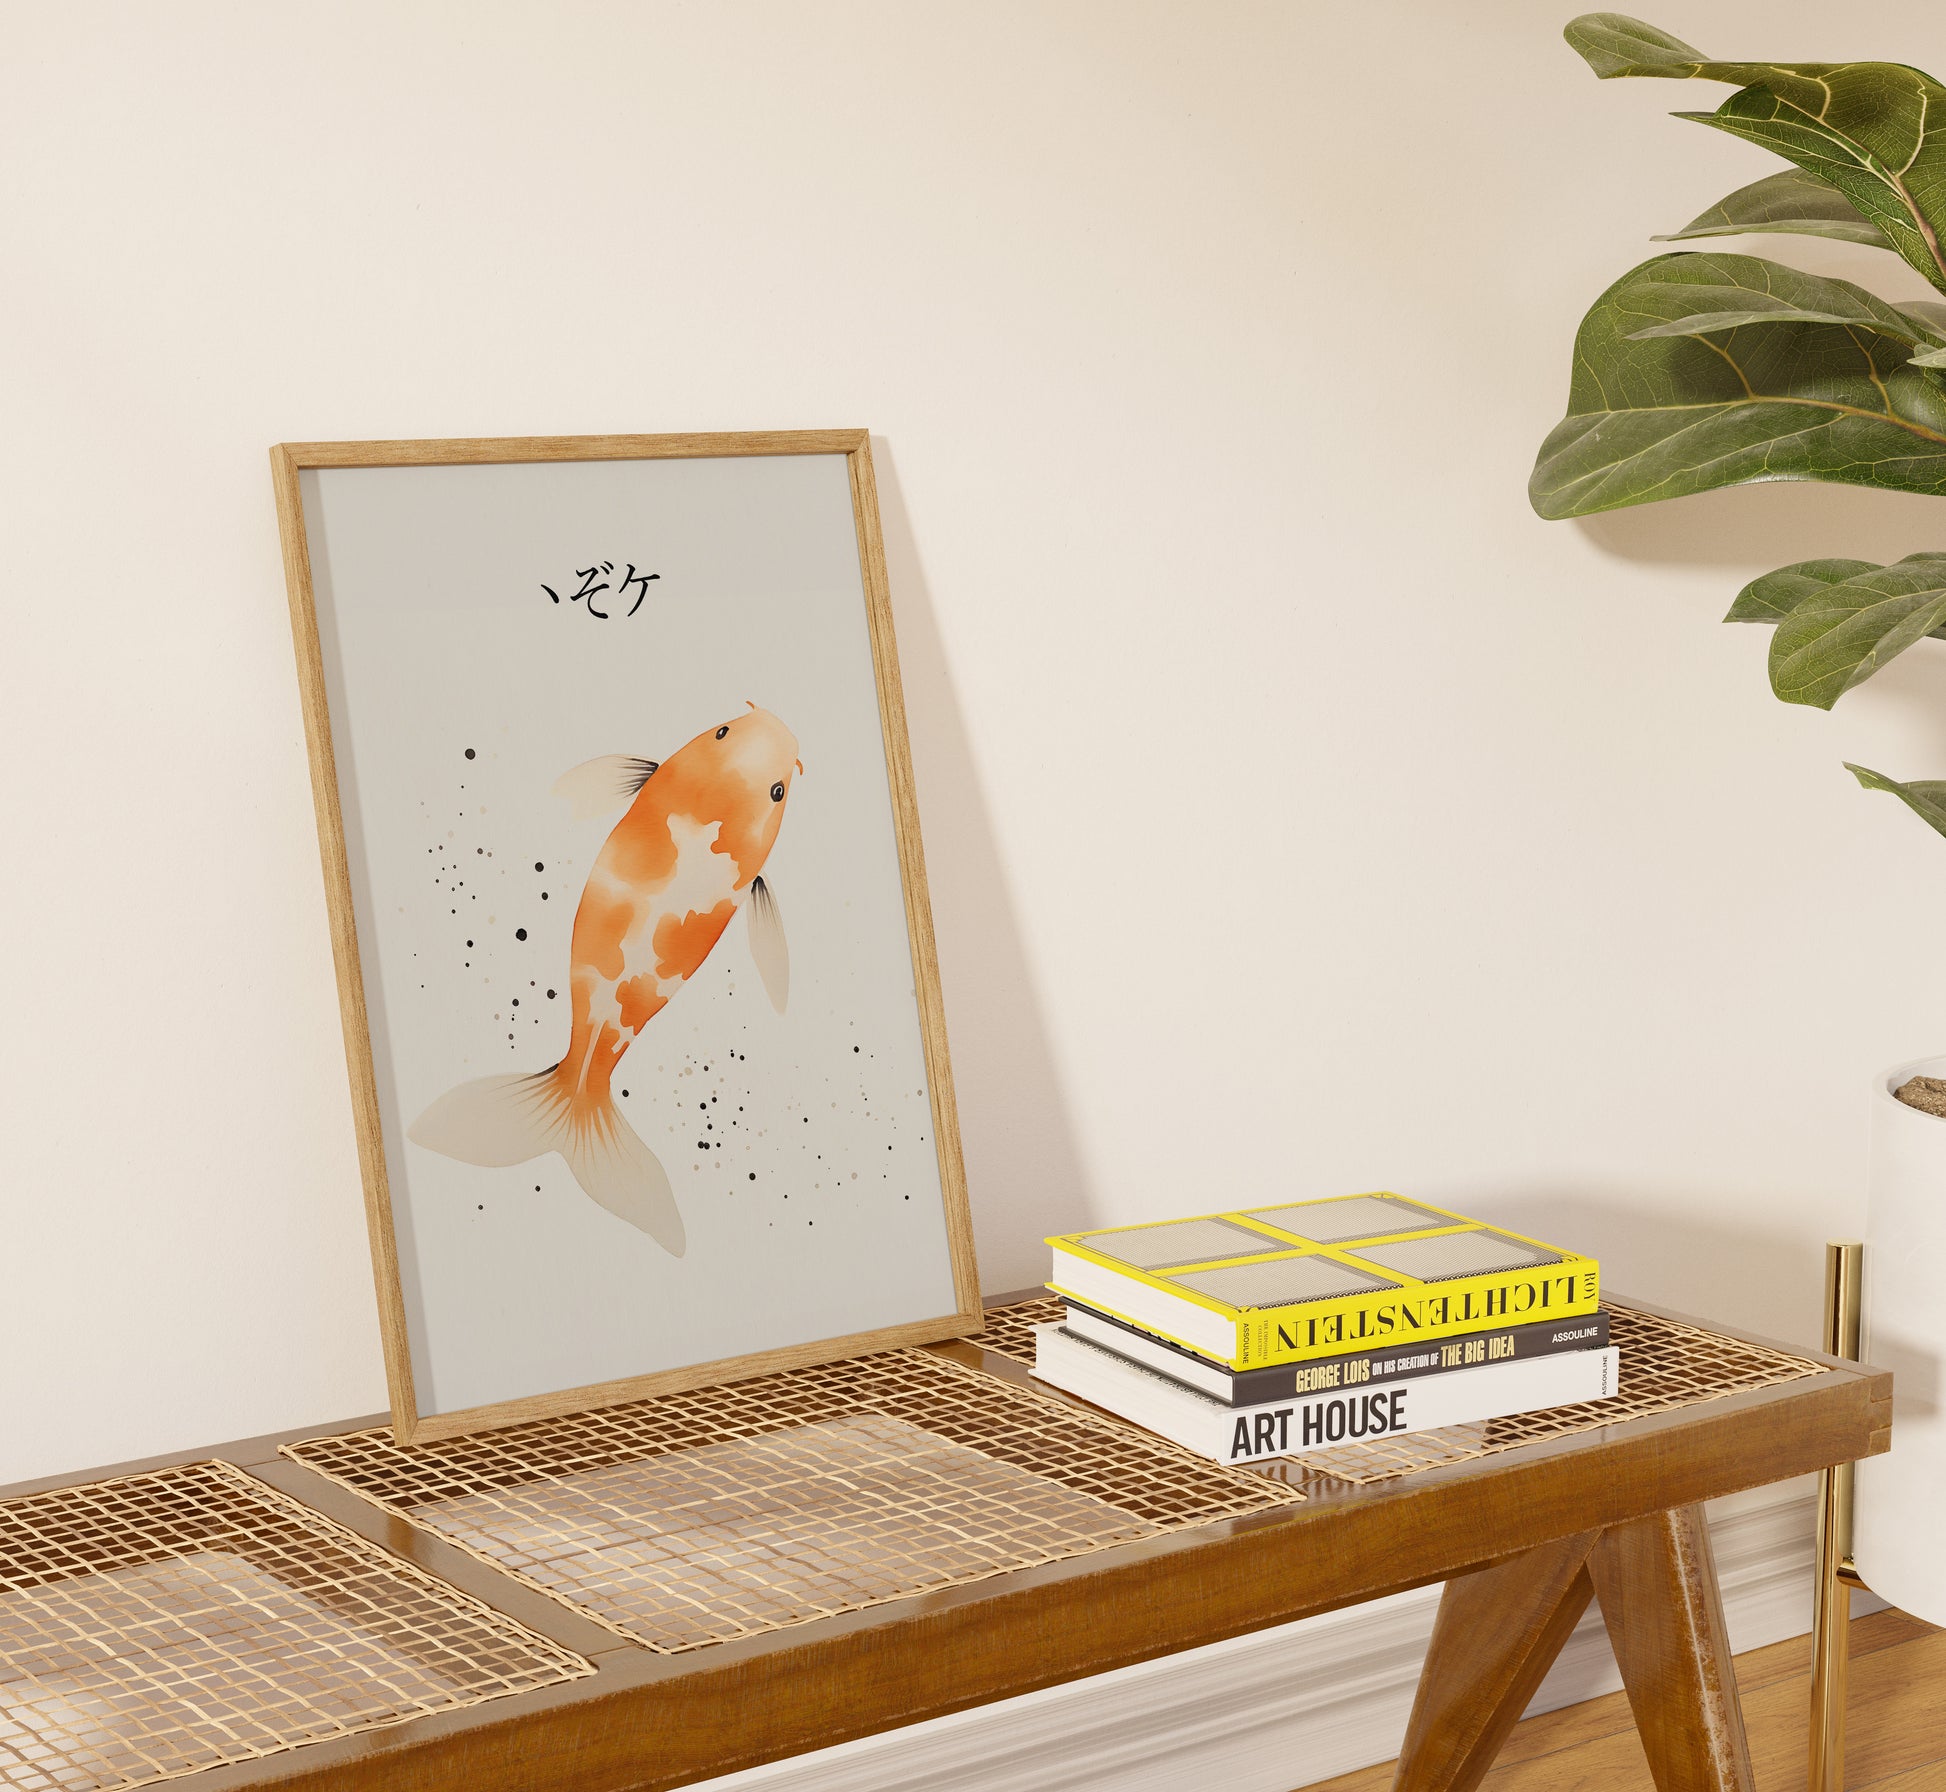 A framed koi fish painting on a shelf next to plant and stacked books.